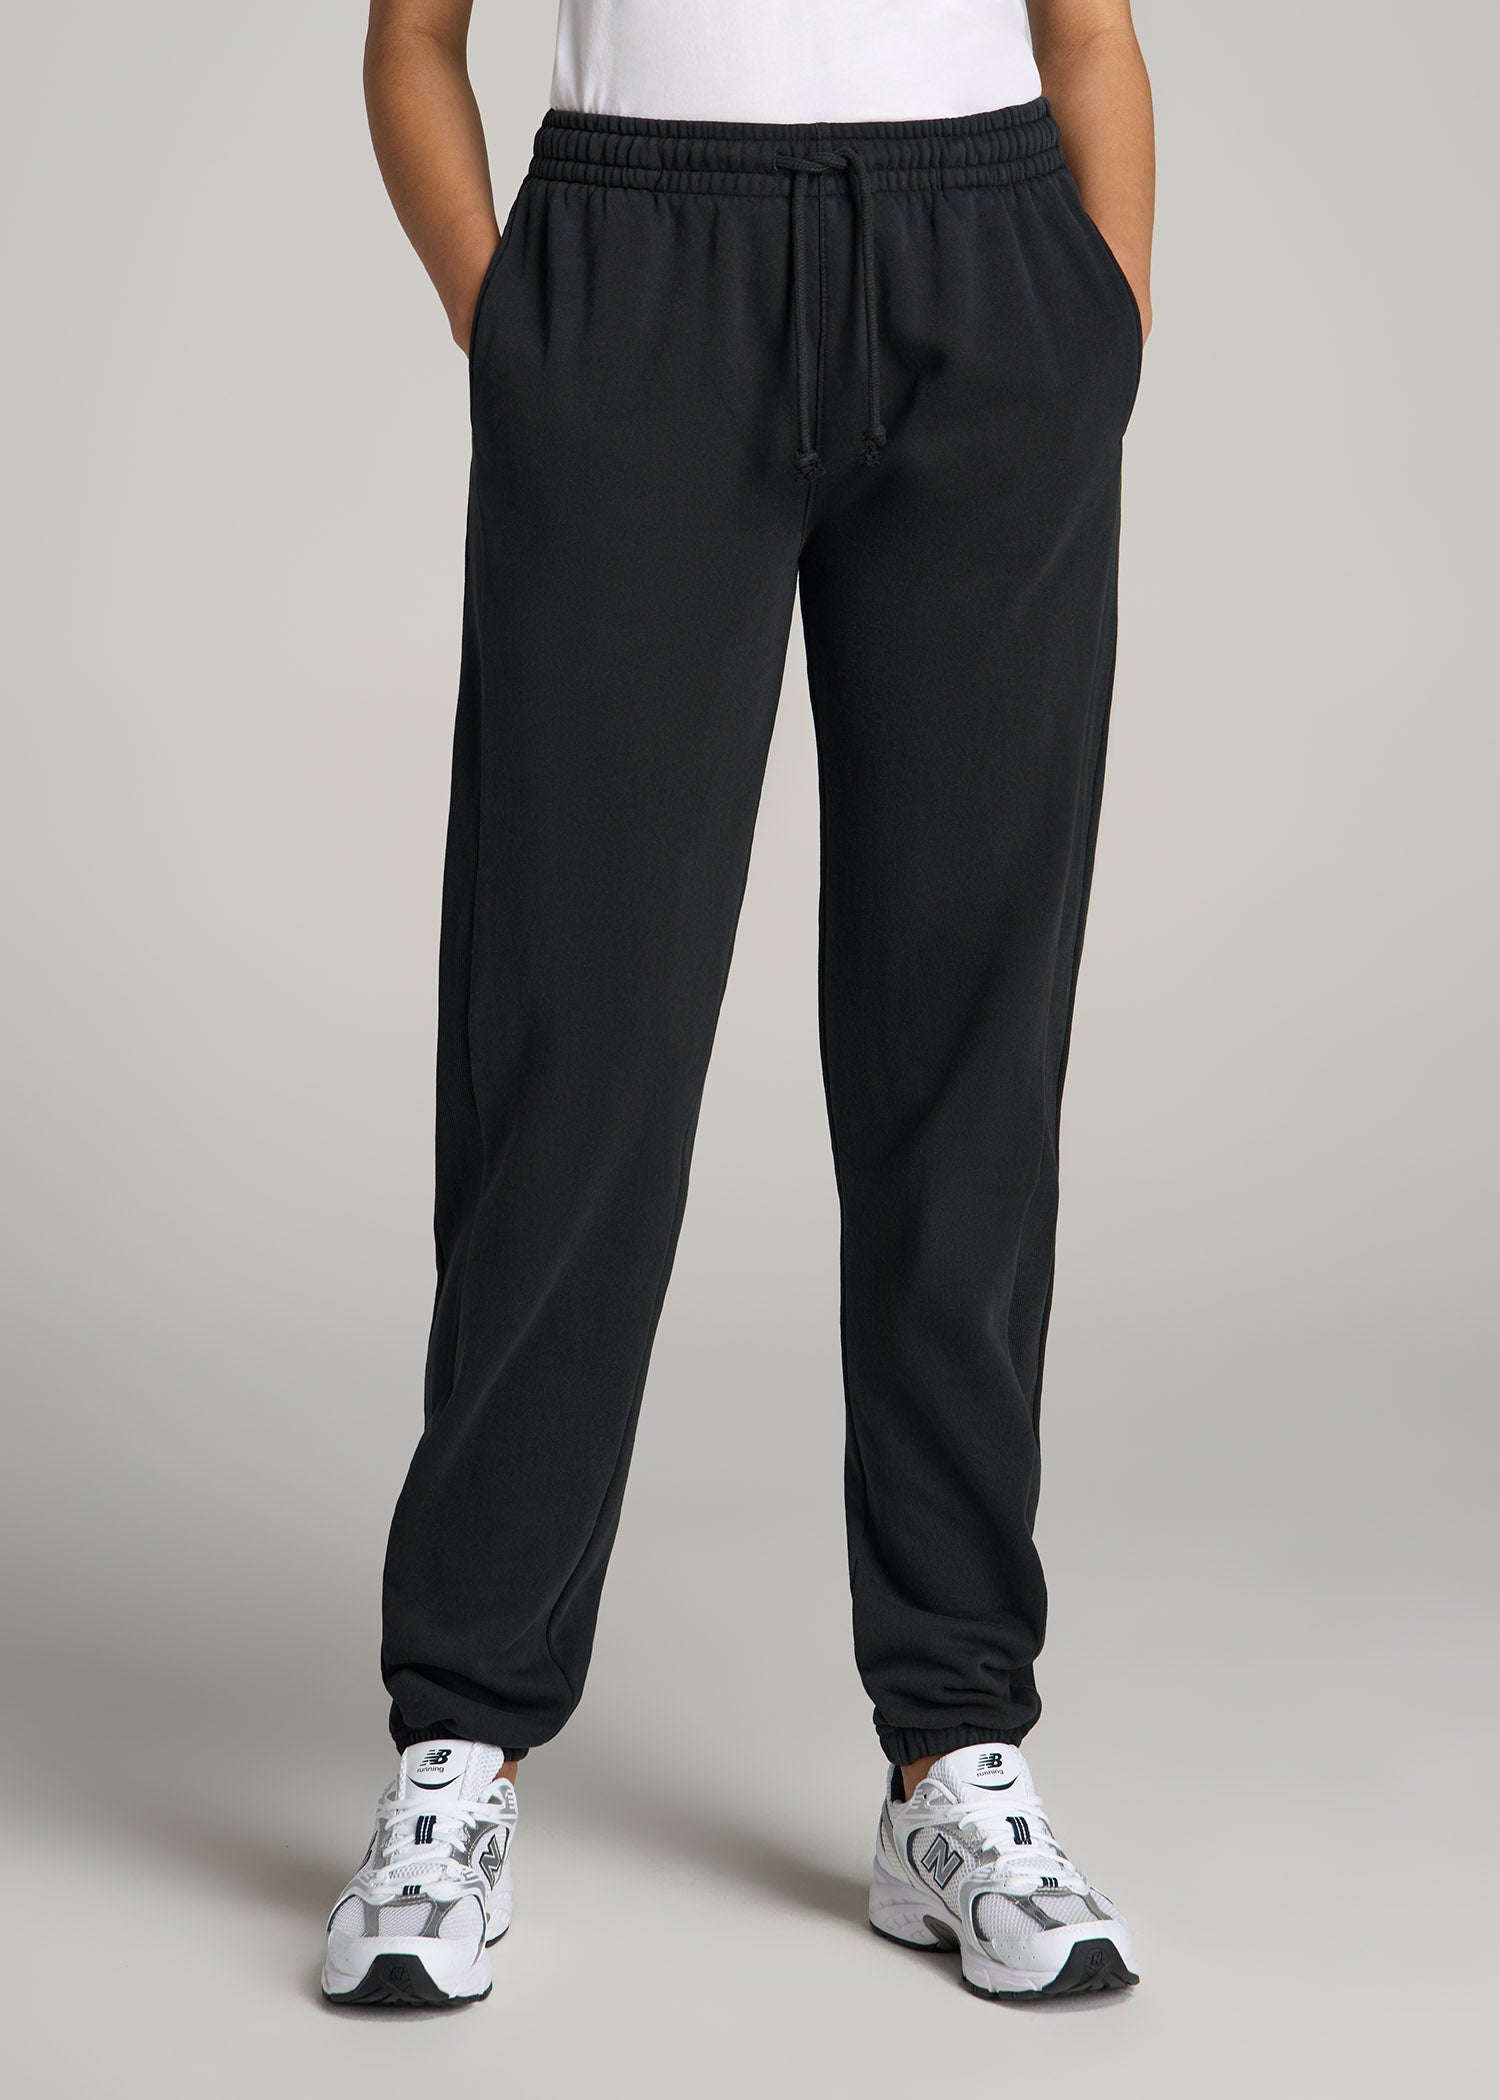 Athletic Joggers - FINAL SALE - OLD FIT